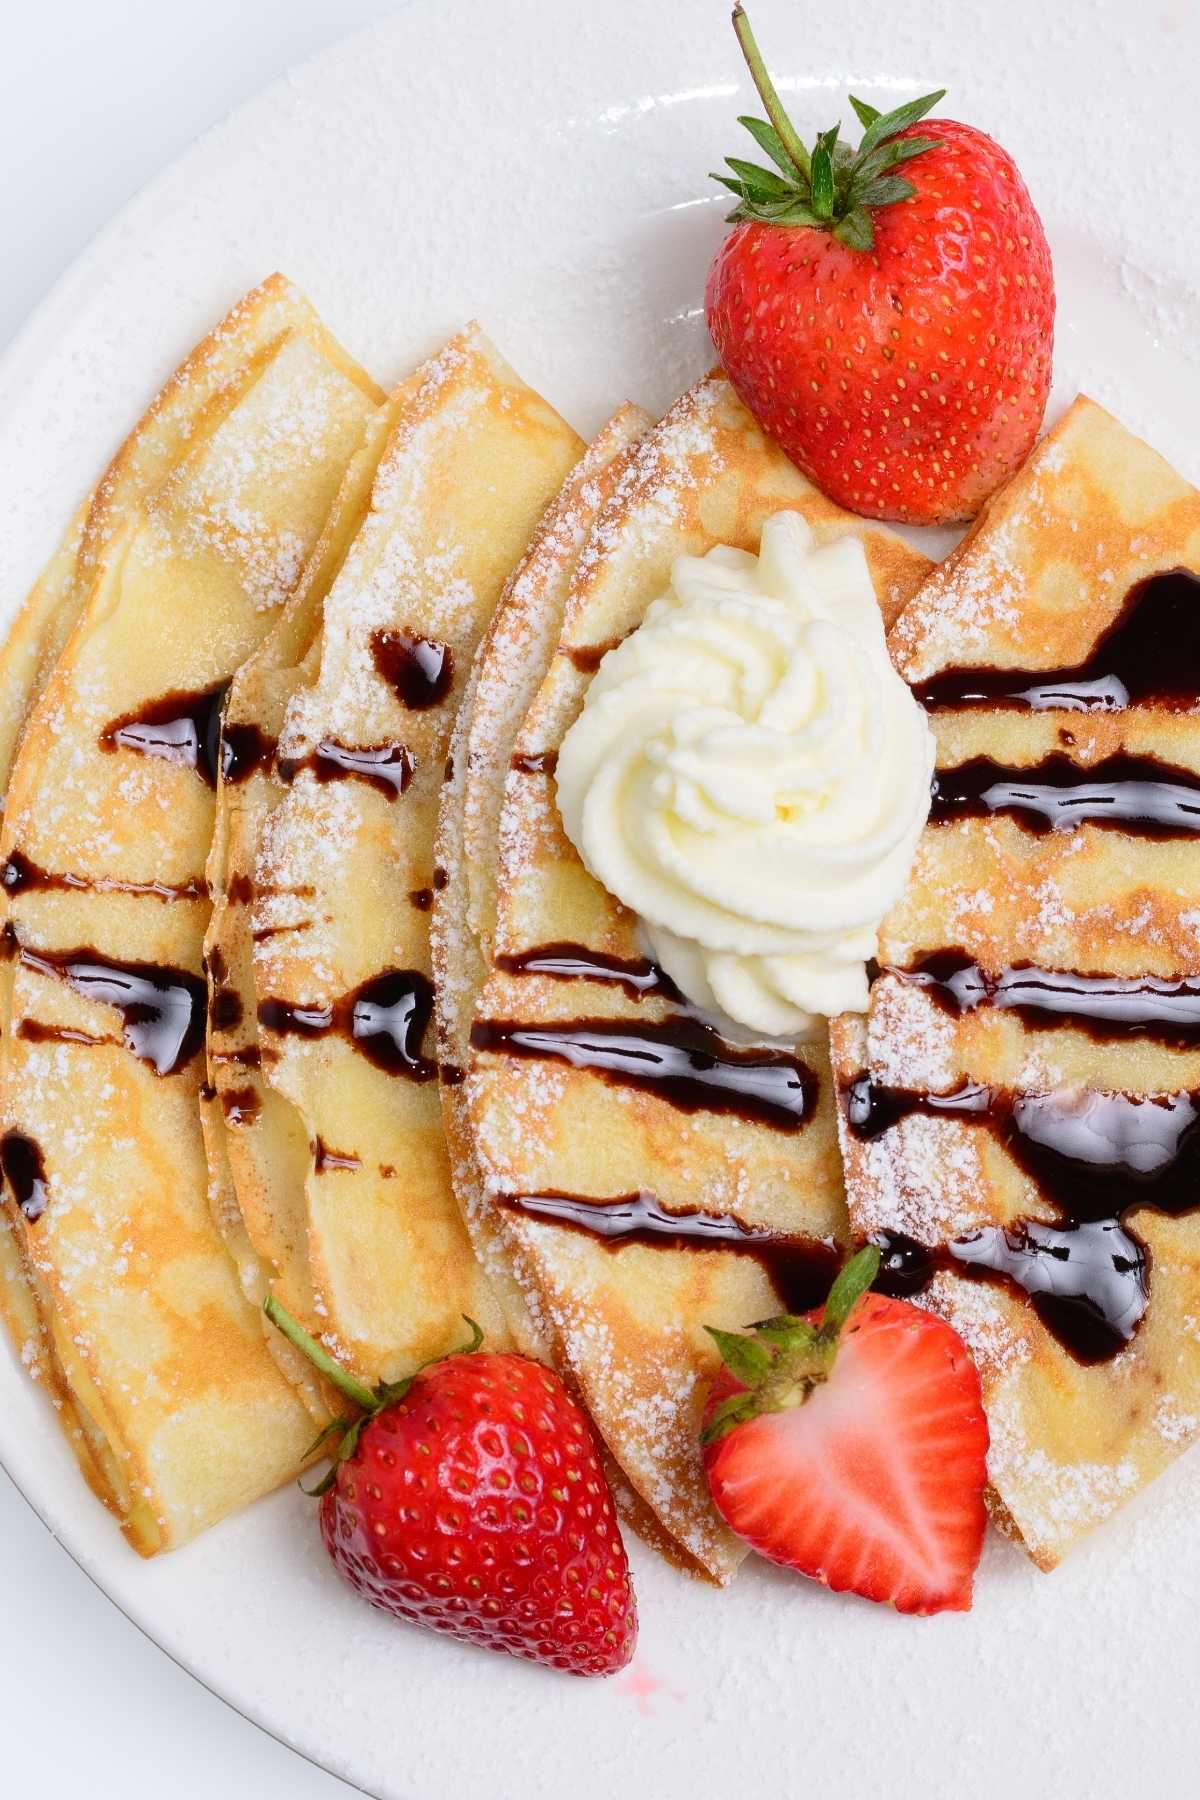 French pancakes with chocolate sauce and whipped cream